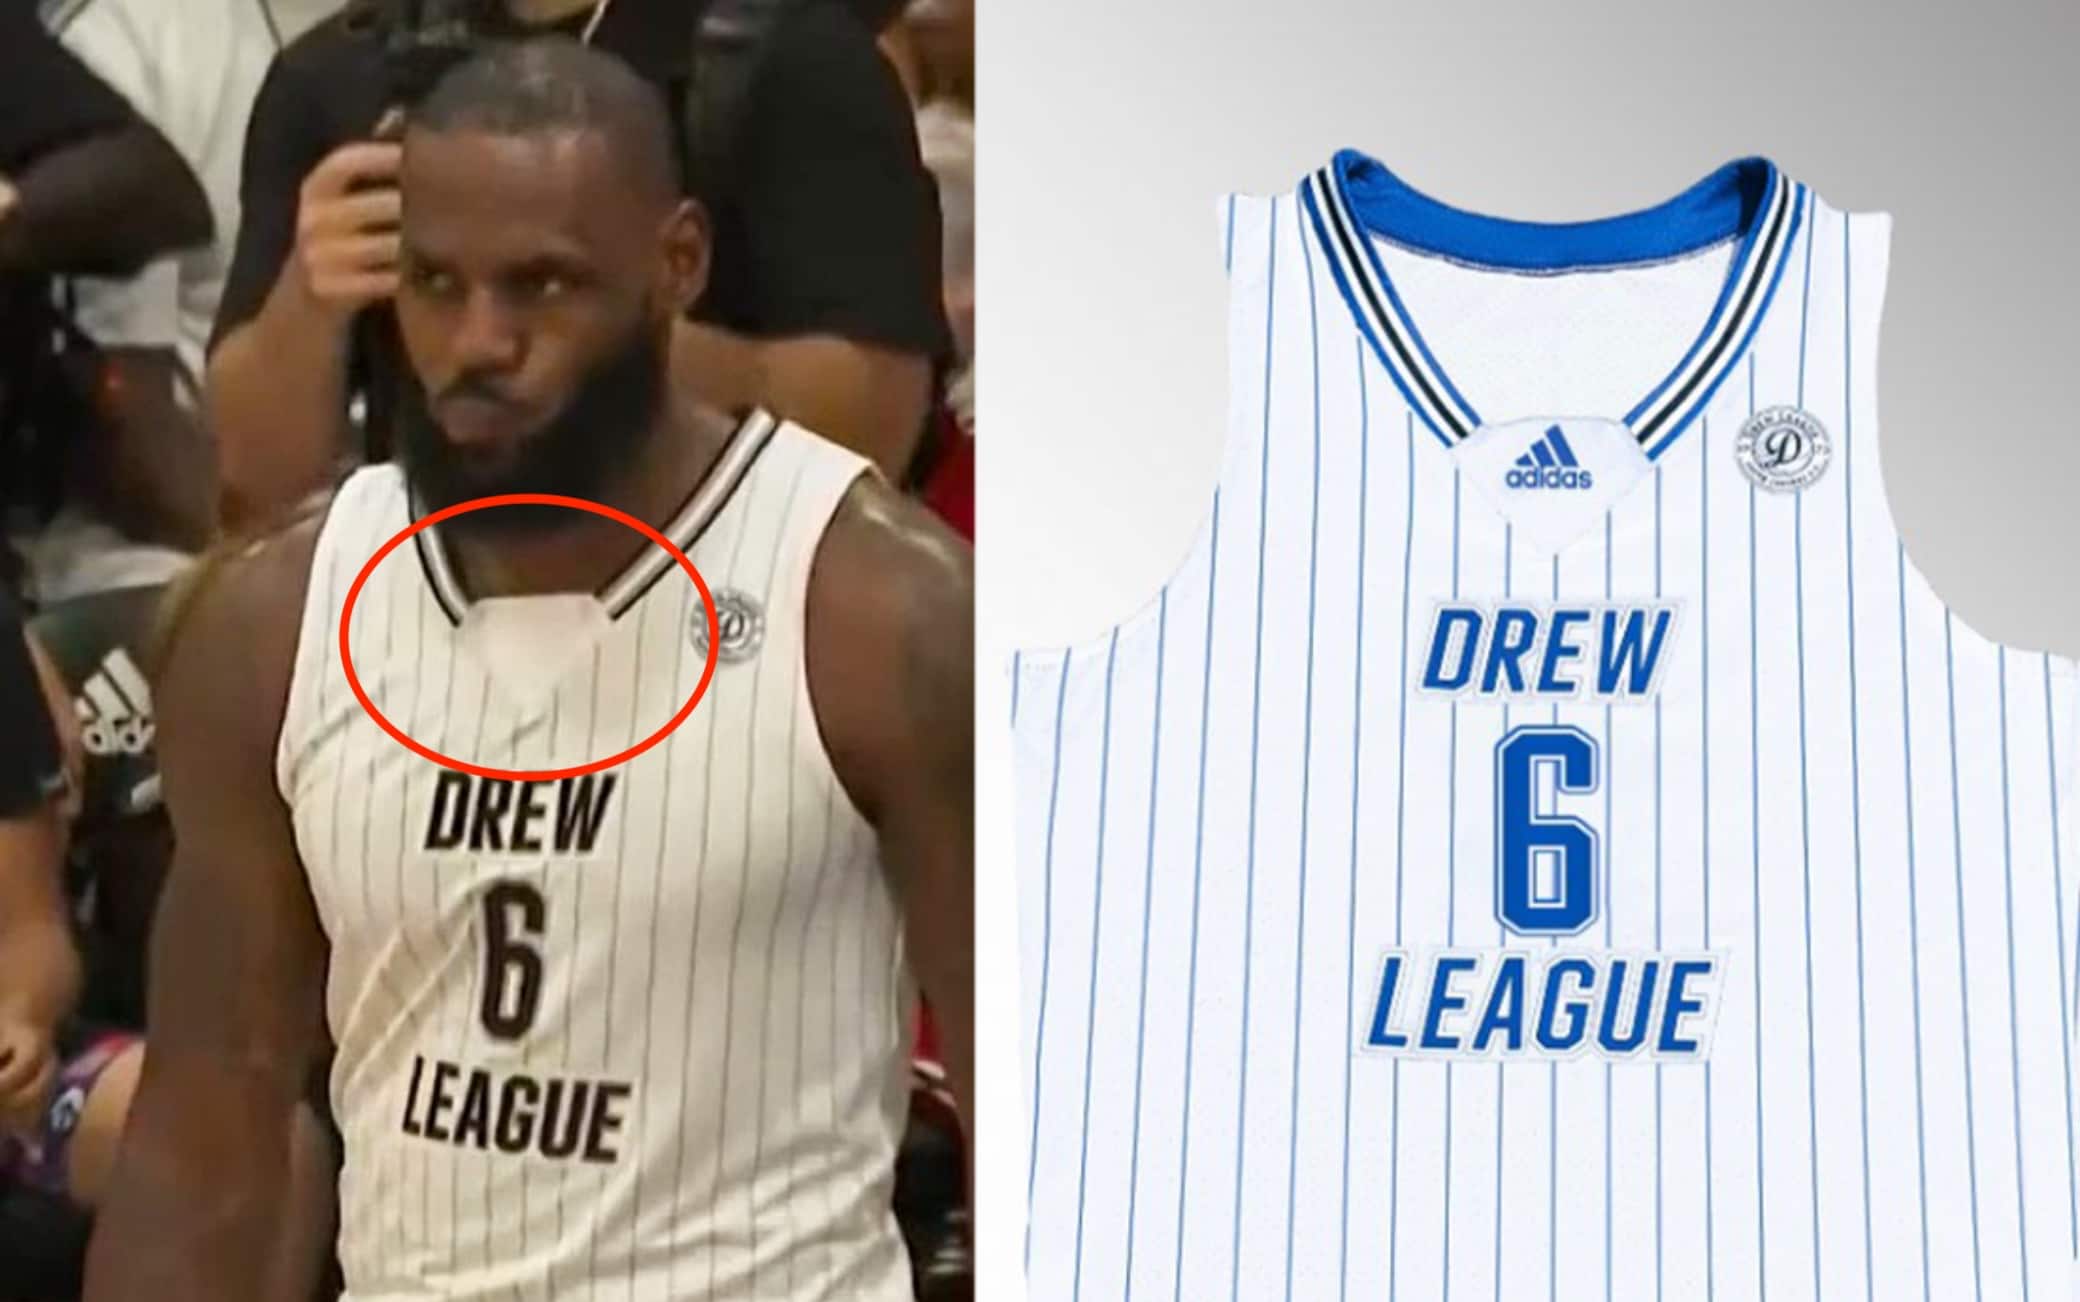 LeBron James covered Adidas logo while playing in Drew League